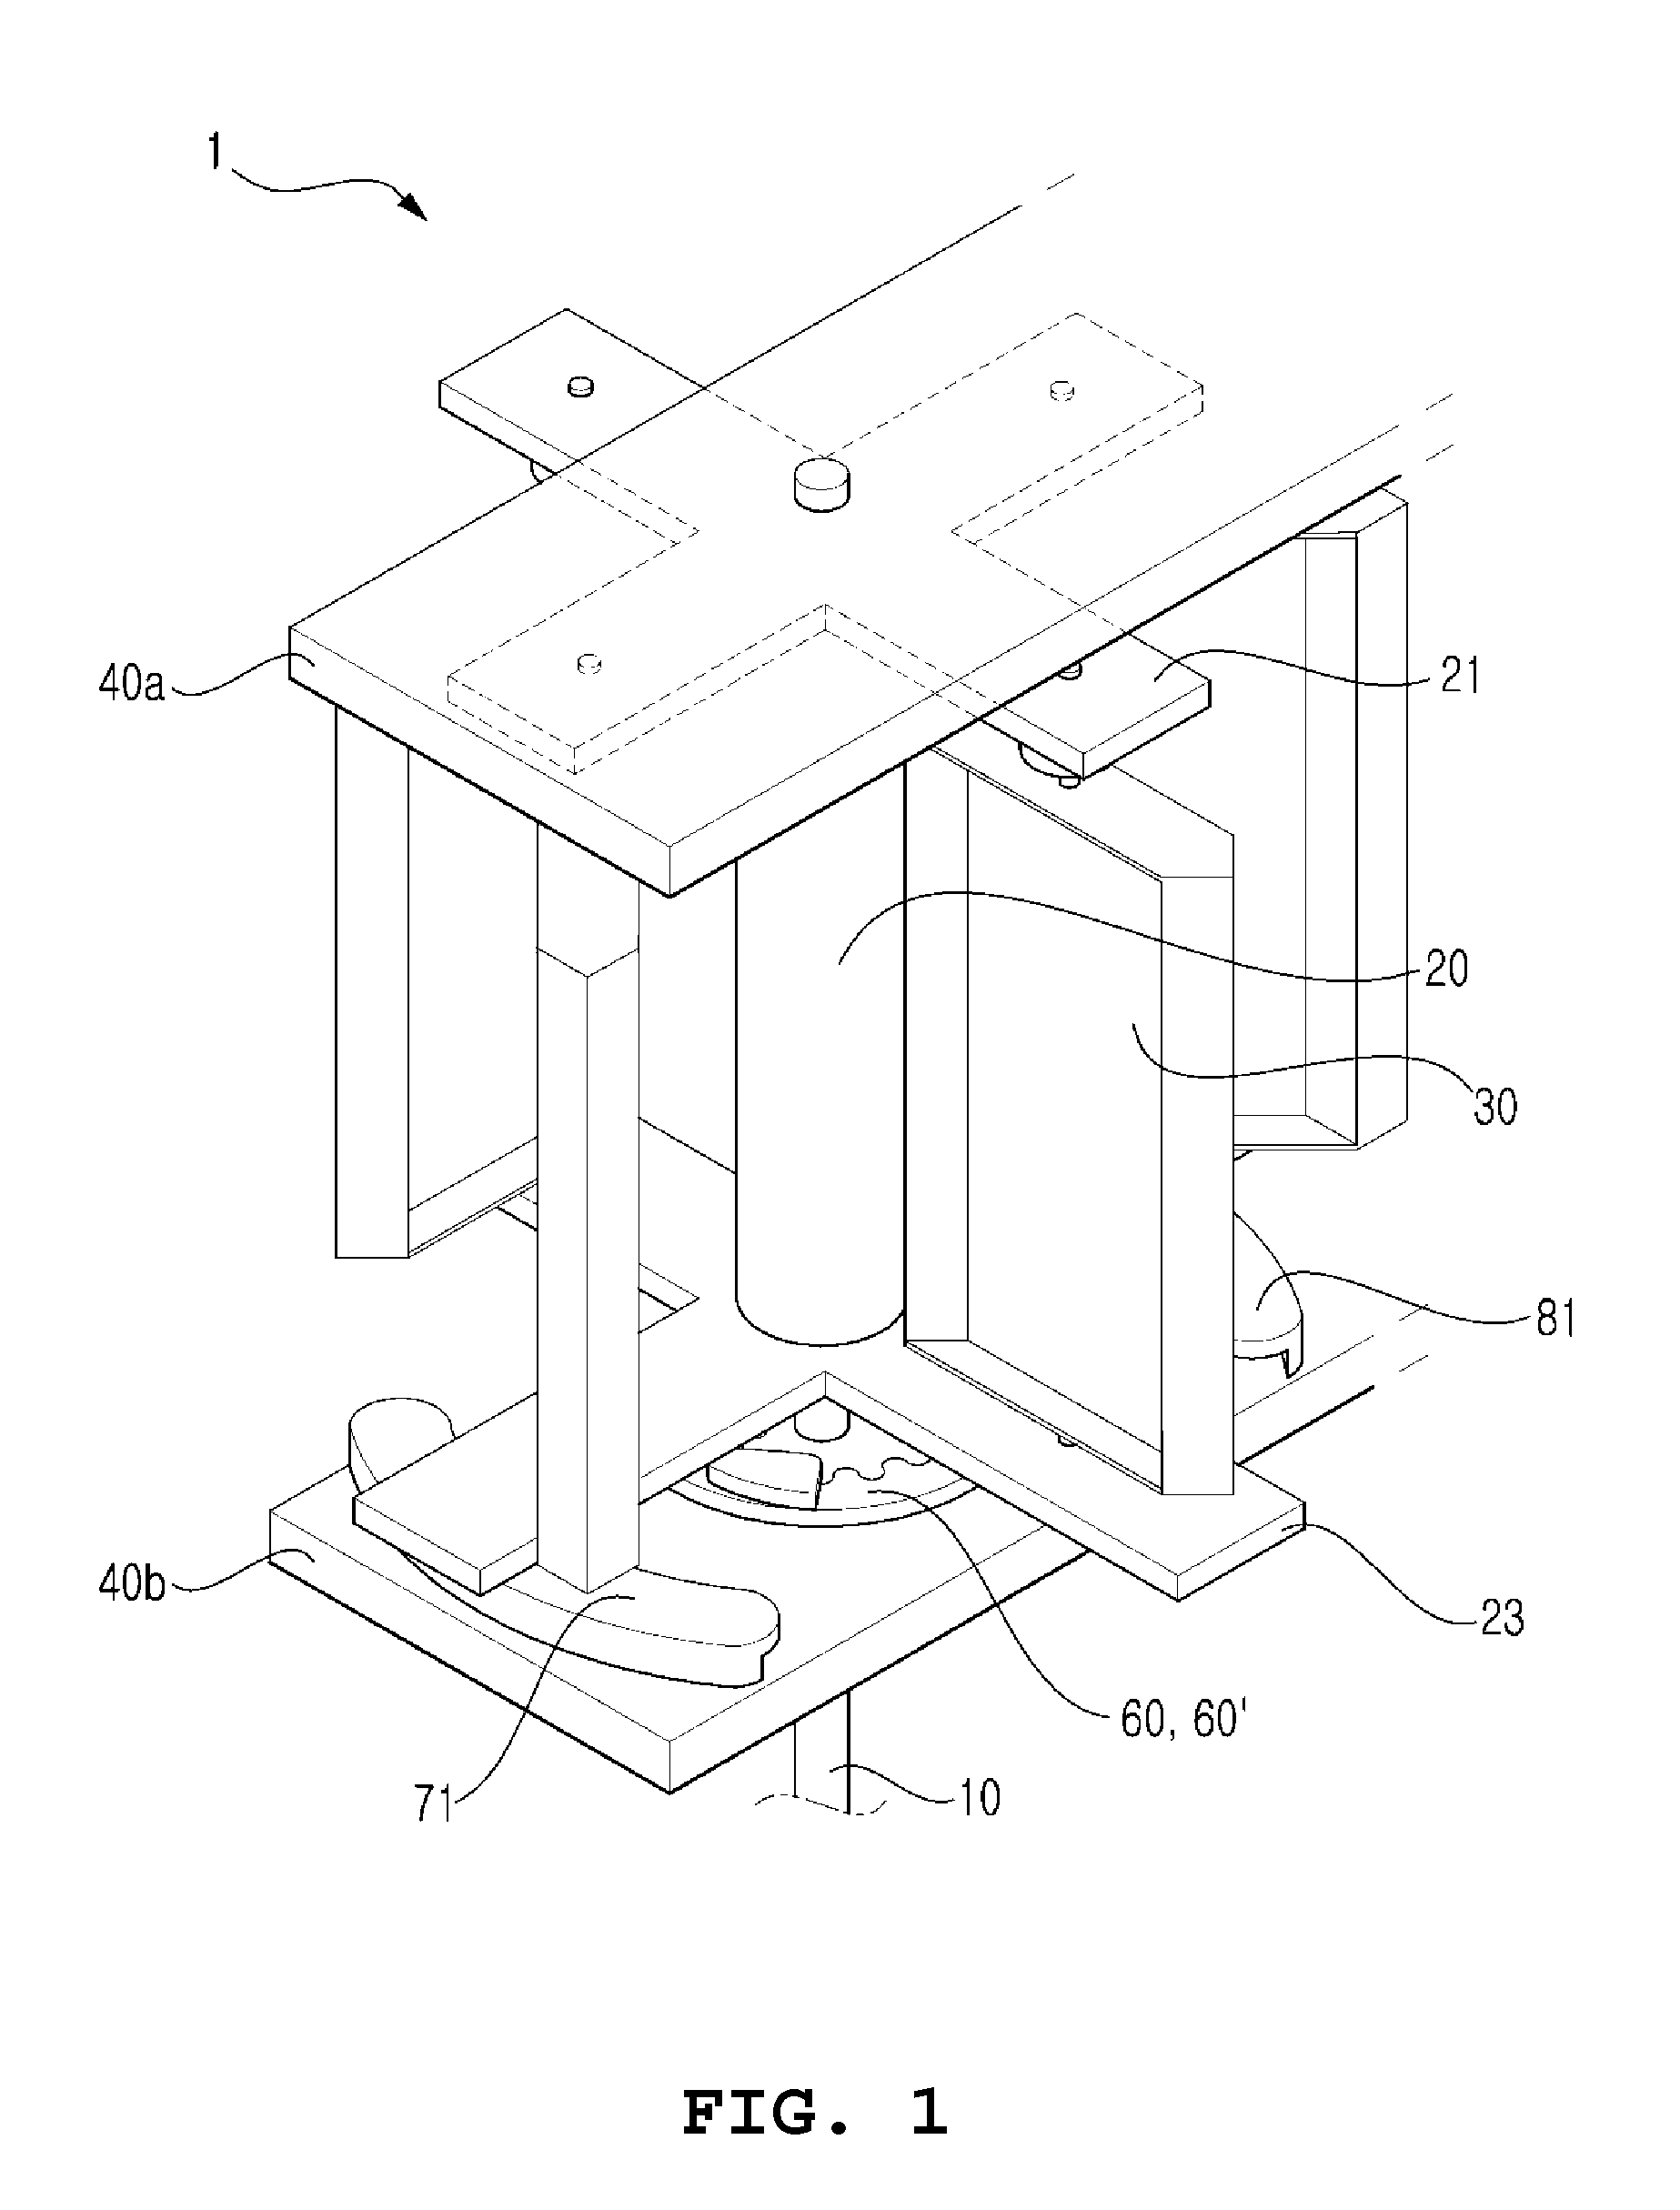 Vertical-Axis Wind Power Generator Having Adjustable-Angle Rotating Blades